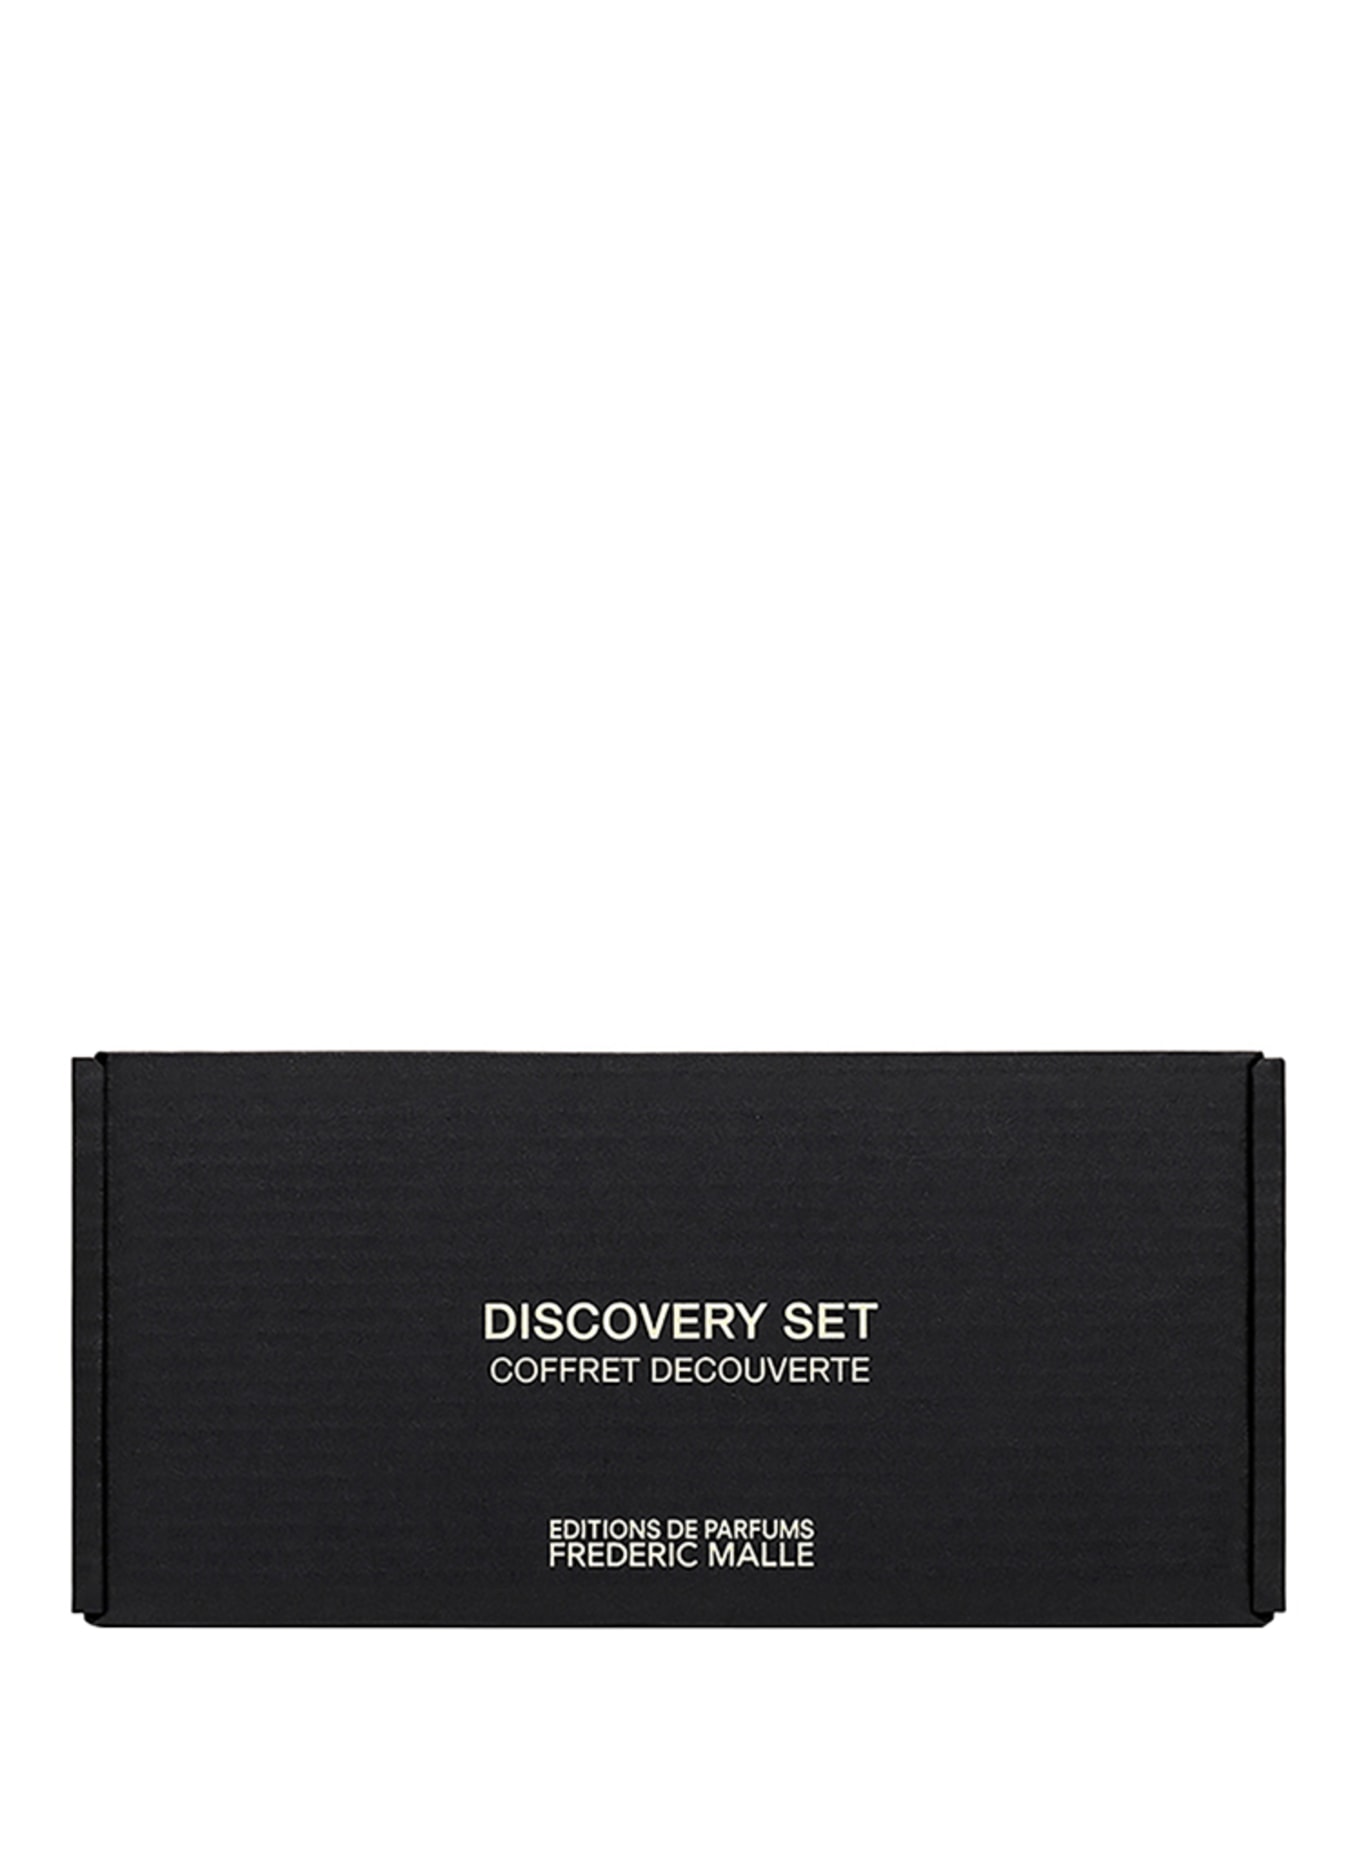 EDITIONS DE PARFUMS FREDERIC MALLE DISCOVERY SET - FOR HER (Obrázek 2)